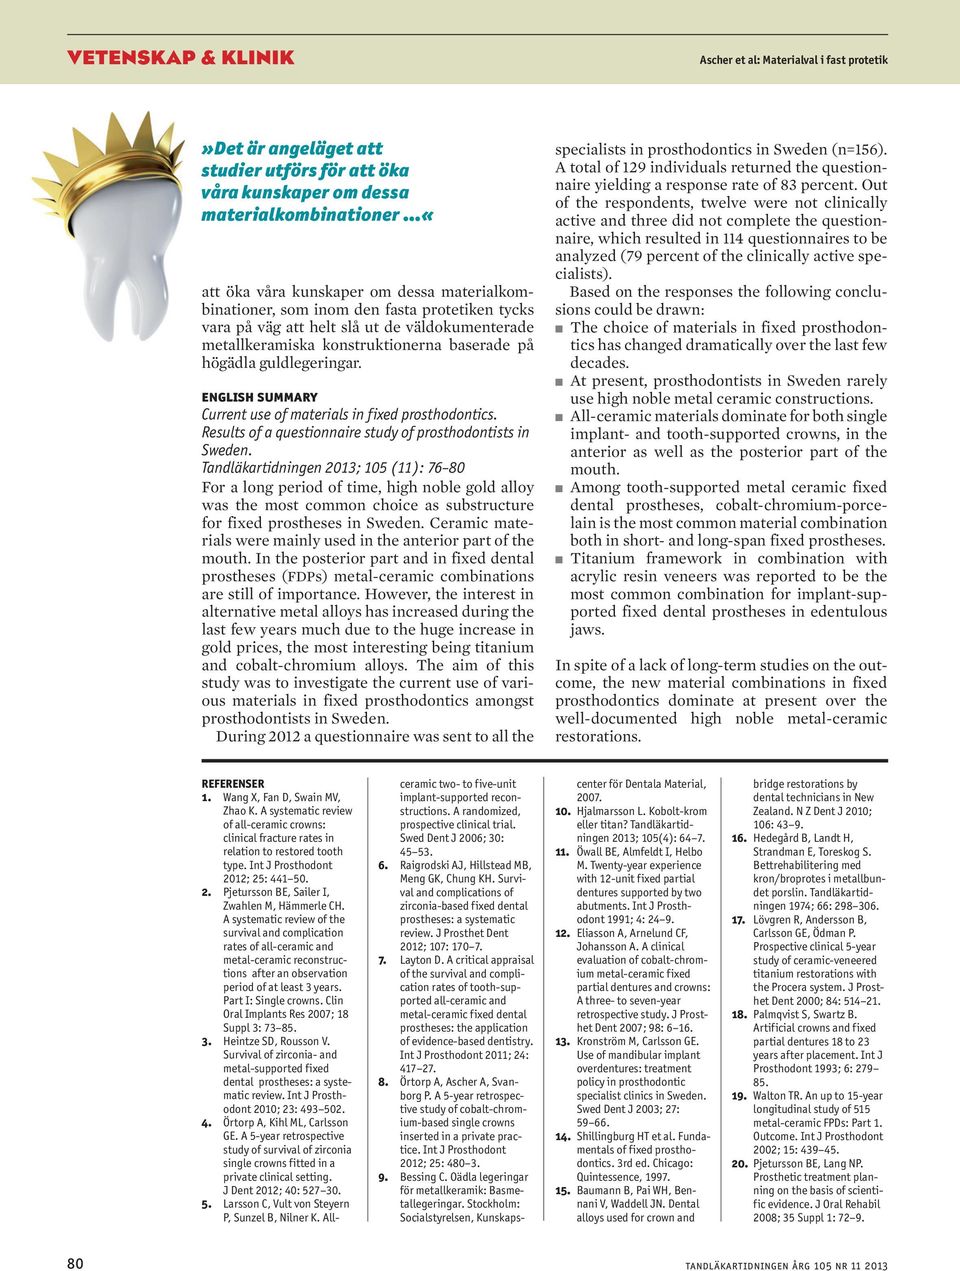 english summary Current use of materials in fixed prosthodontics. Results of a questionnaire study of prosthodontists in Sweden.